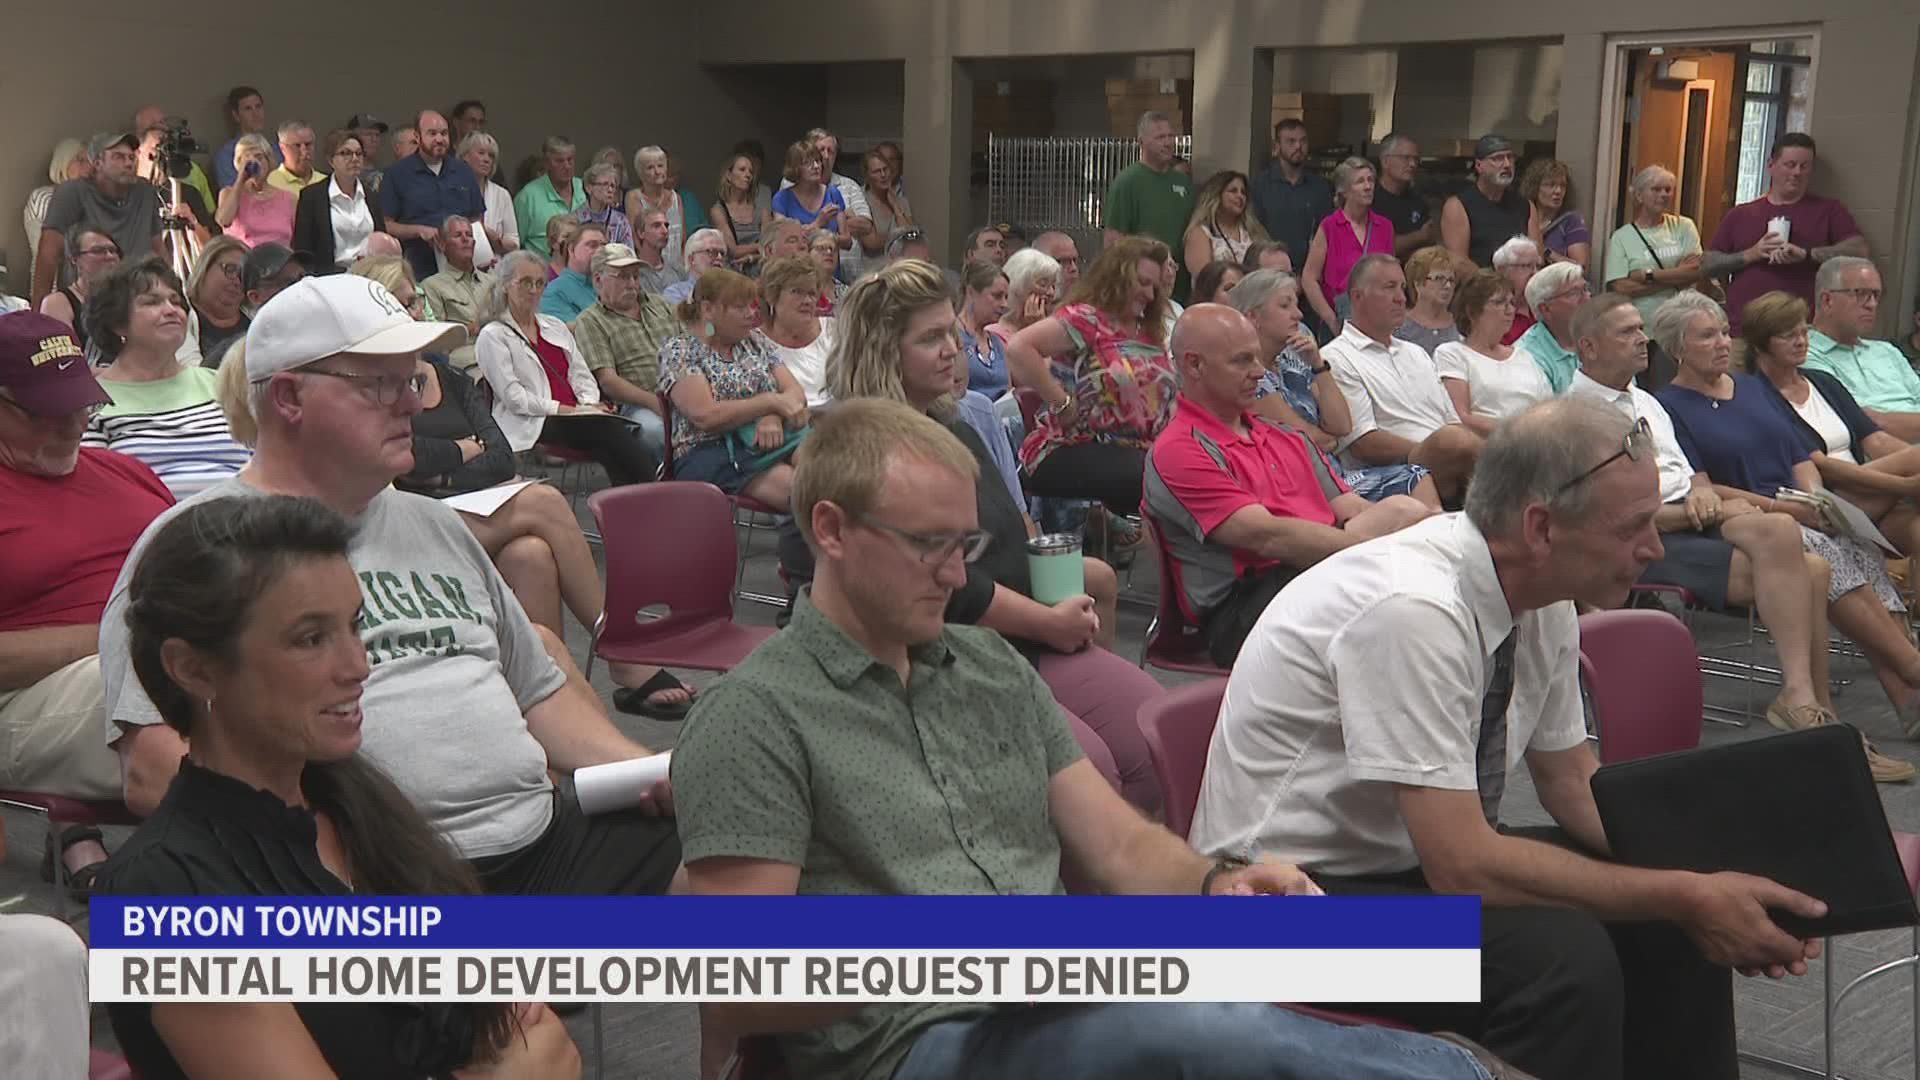 Many residents protested the developments, citing traffic concerns and overcrowding in schools.